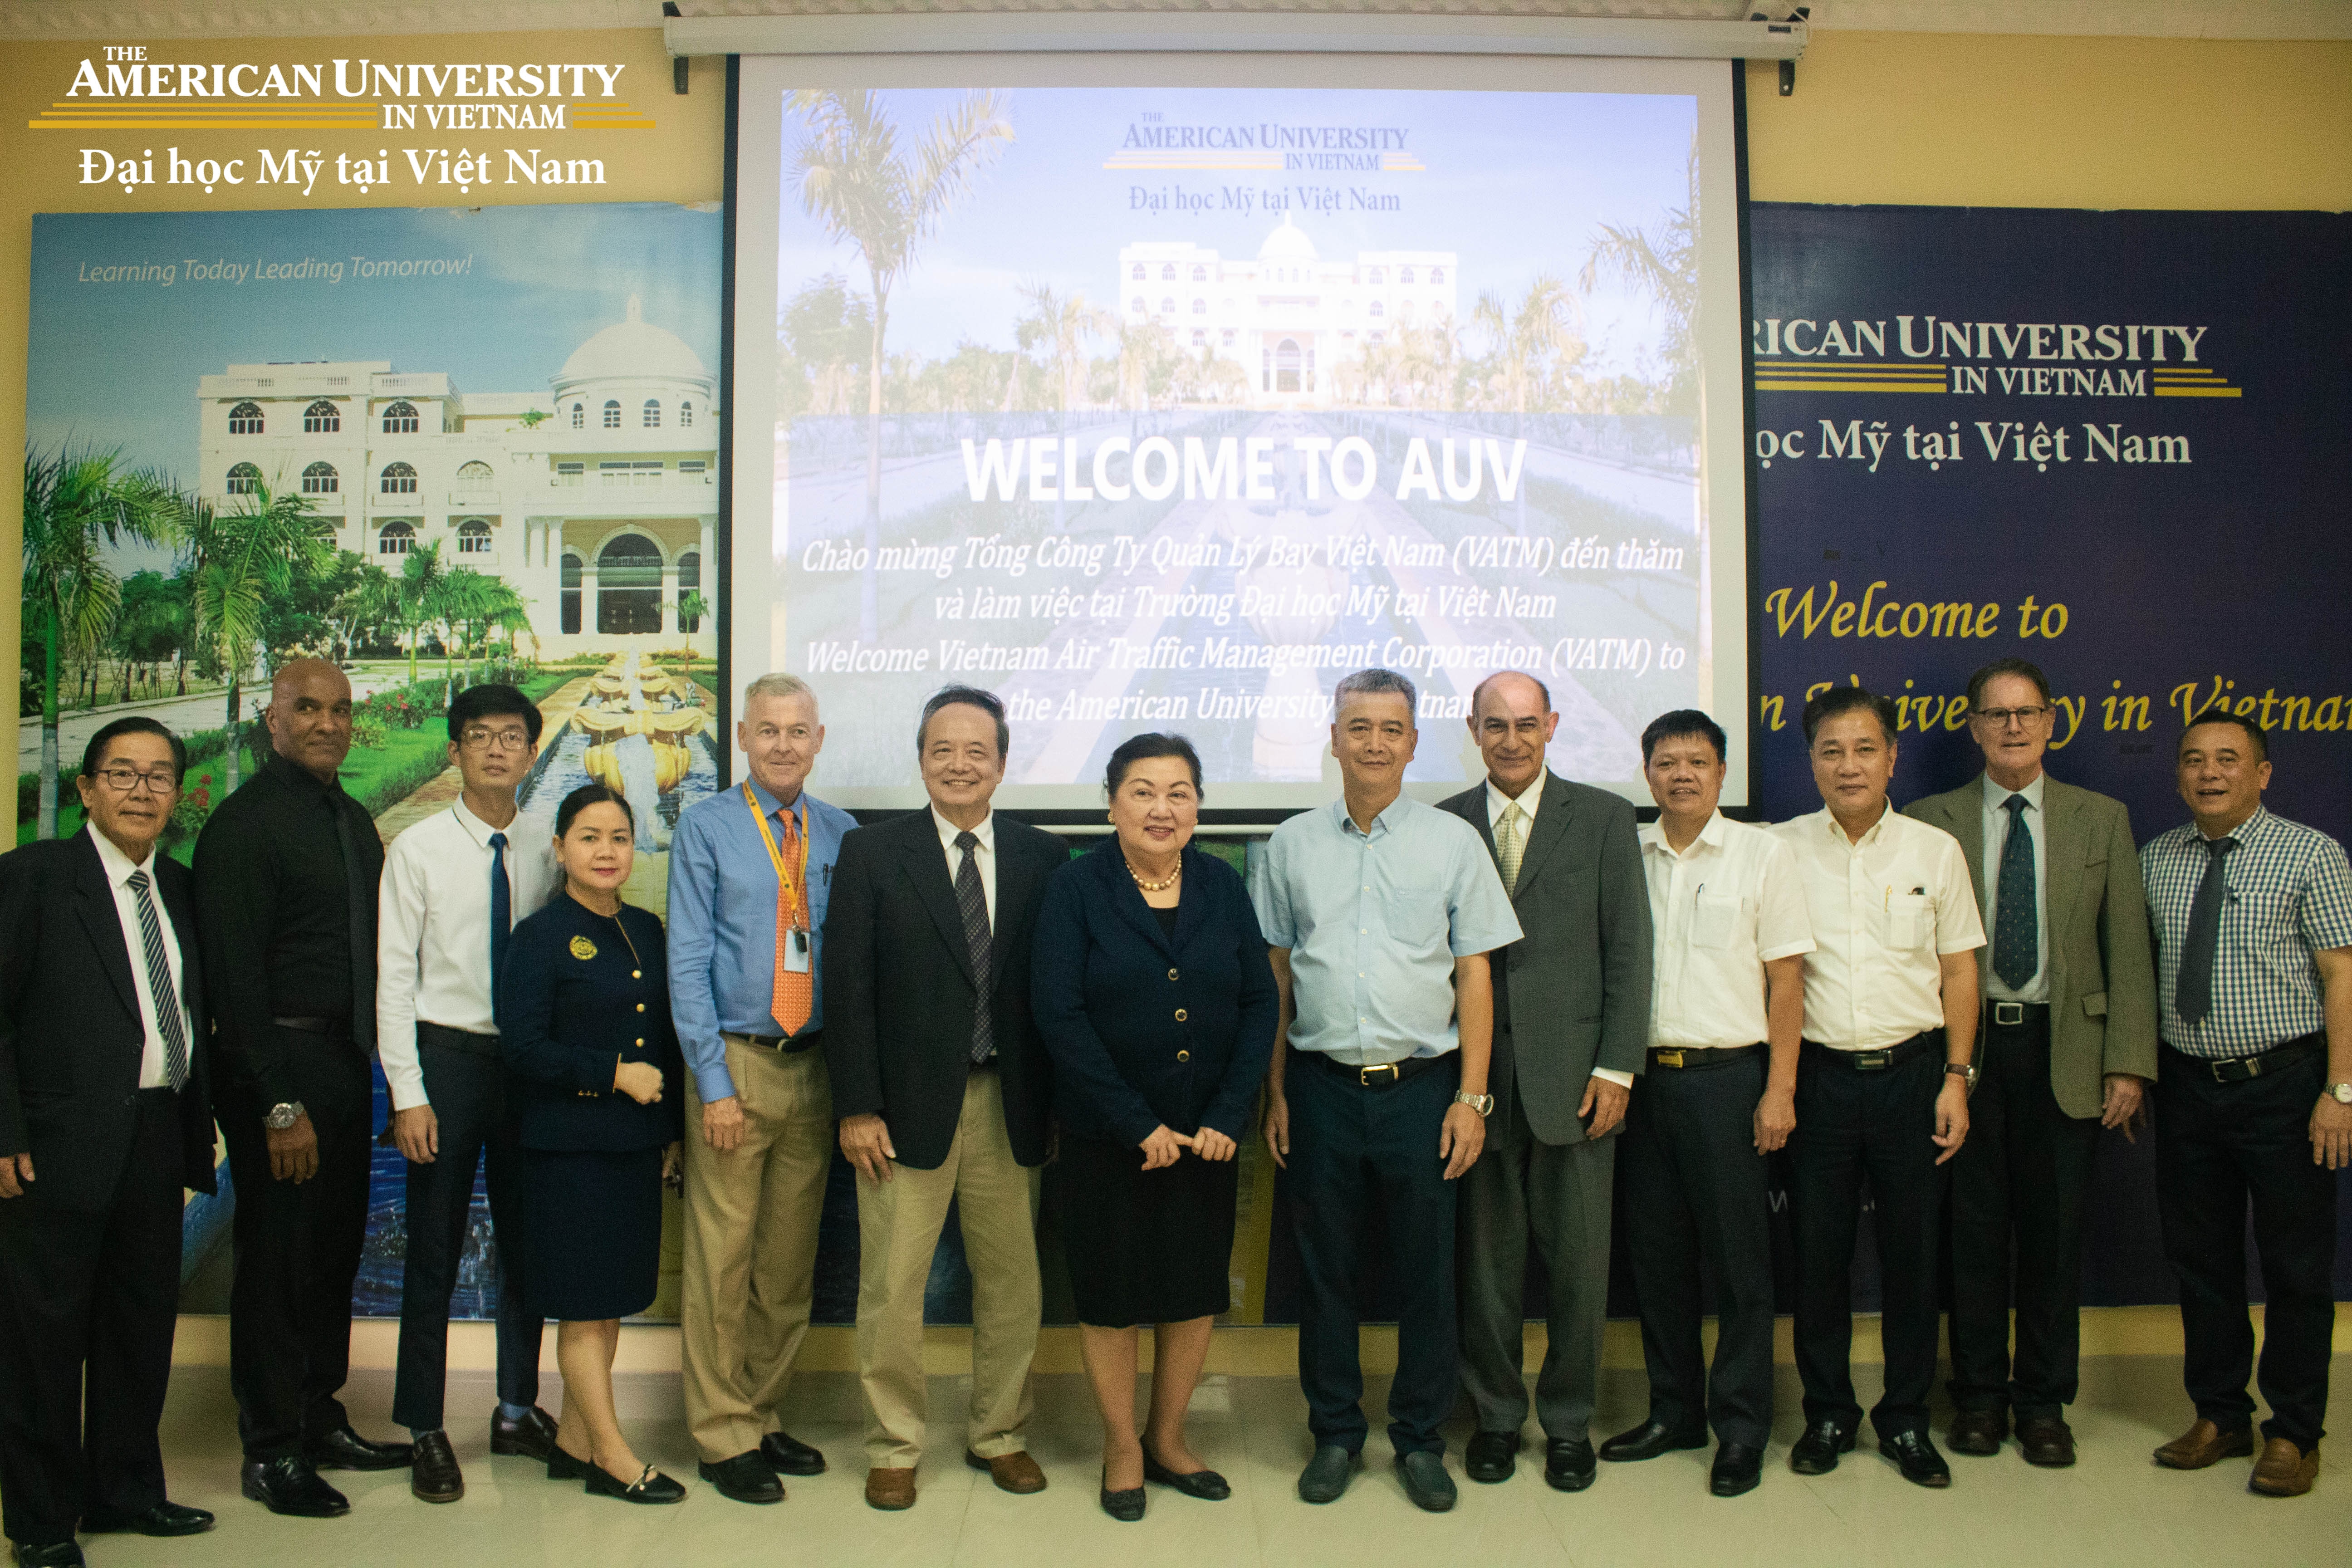 THE AMERICAN UNIVERSITY IN VIETNAM AUV - THE BRIDGE BETWEEN THE UNITED STATES-VIETNAM EDUCATION COOPERATION